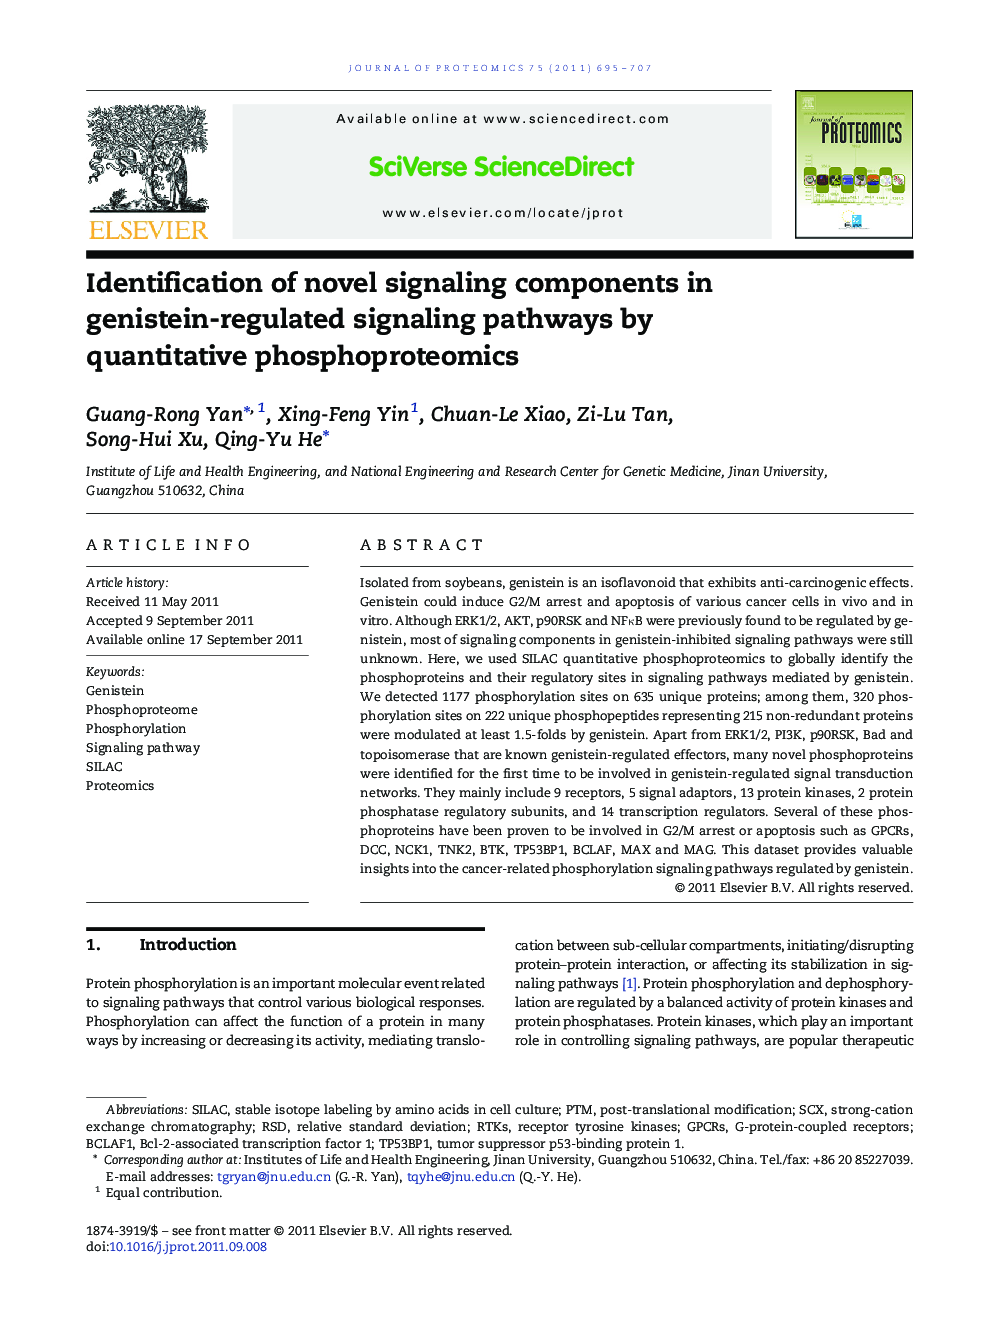 Identification of novel signaling components in genistein-regulated signaling pathways by quantitative phosphoproteomics